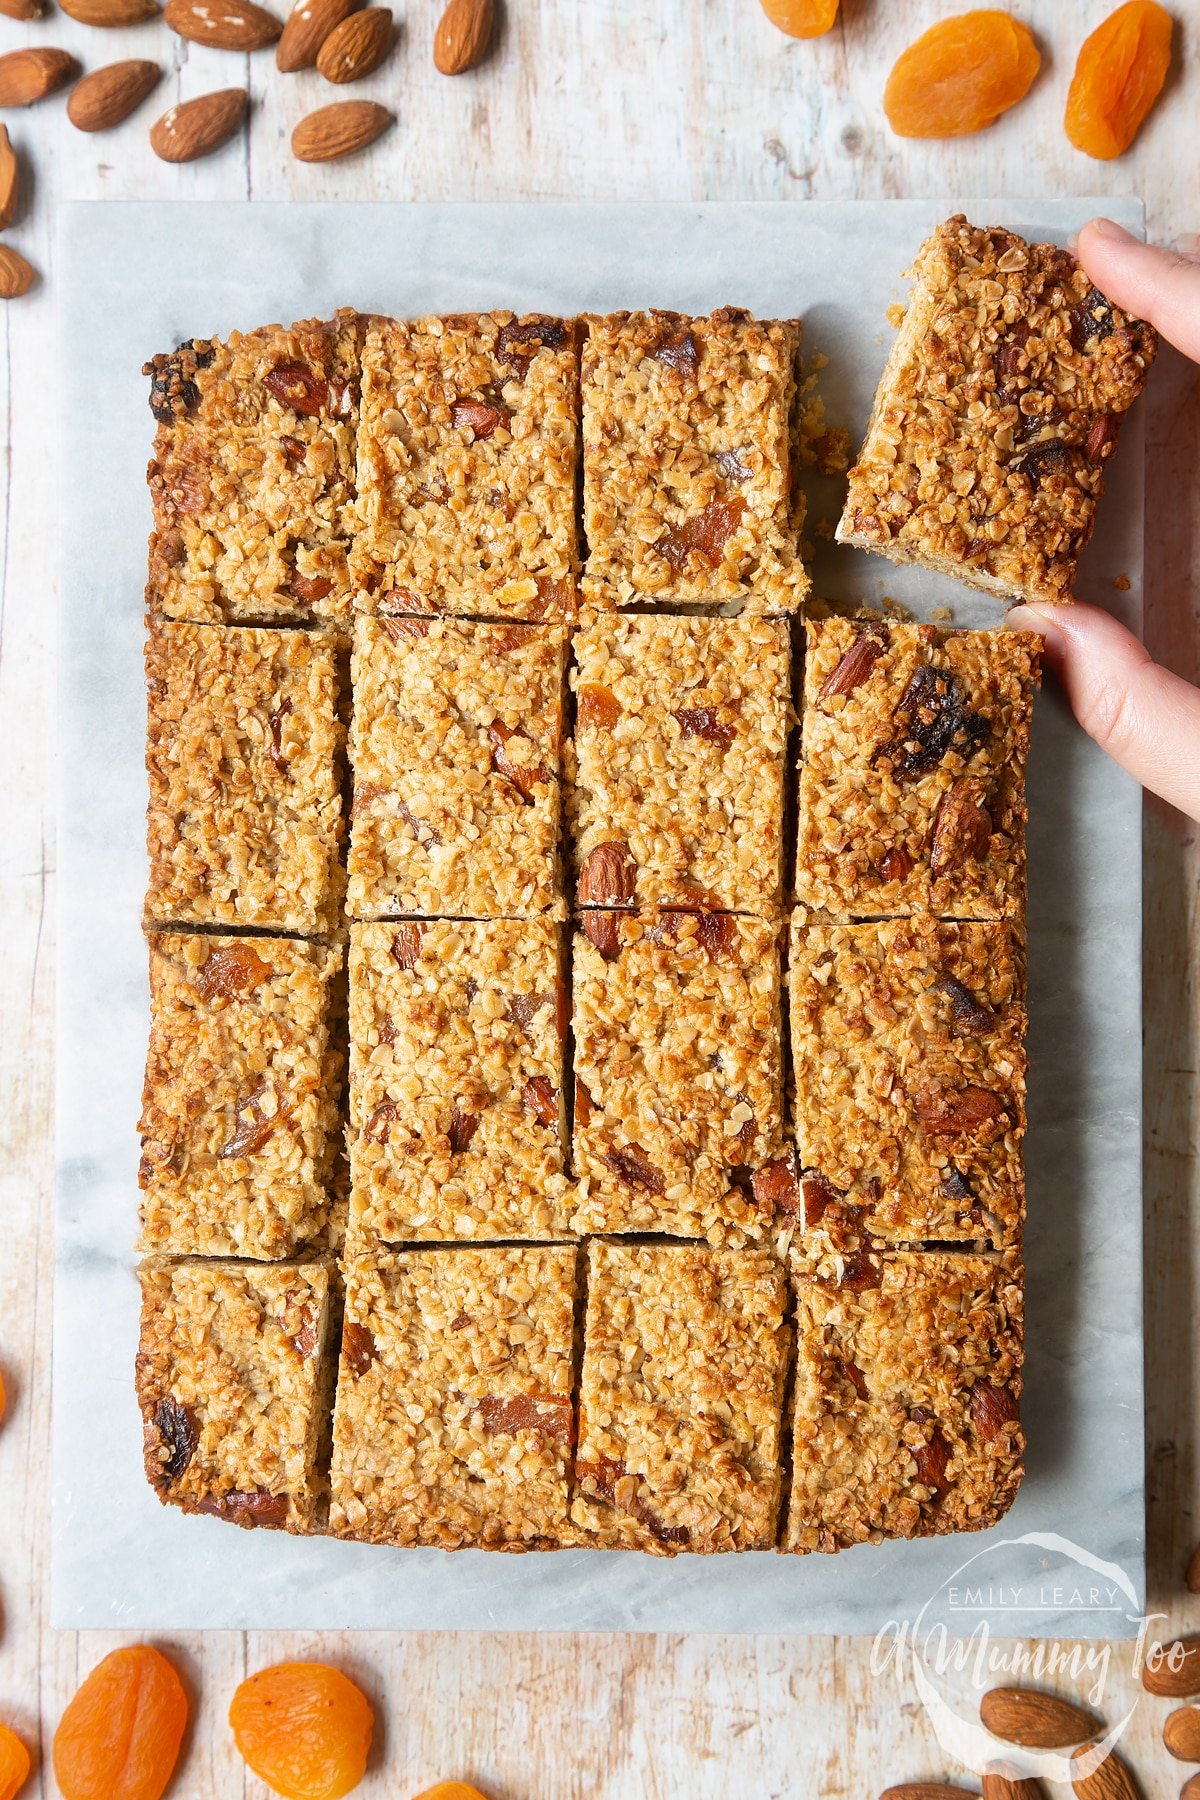 Overhead shot of a hand picking up a Apricot oat slice from a lined baking tray